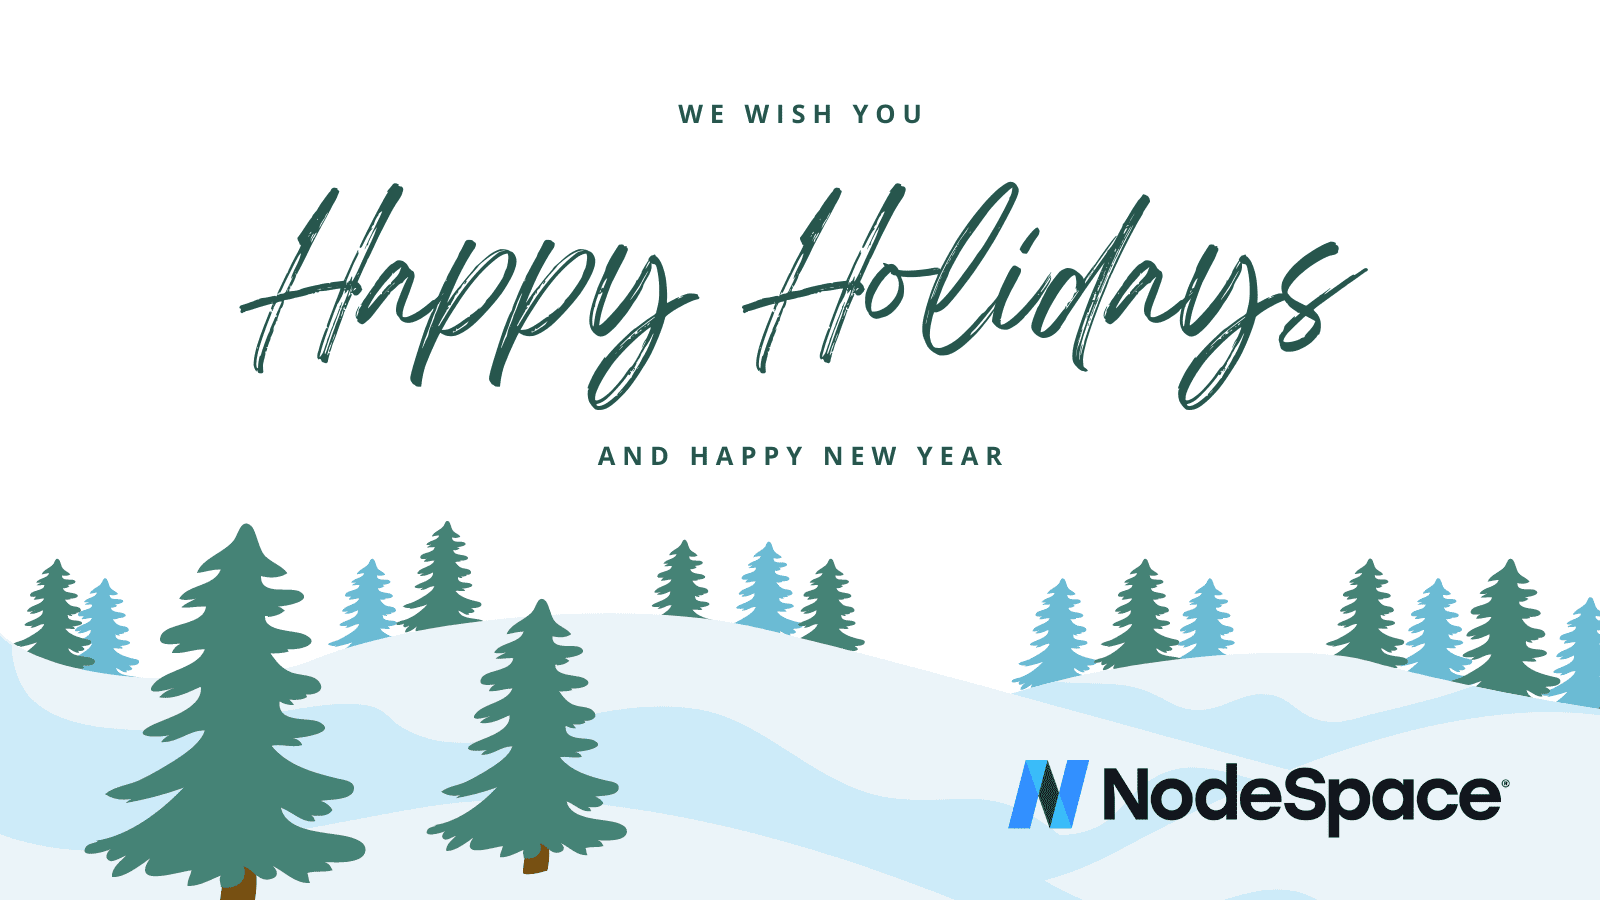 We wish you a Happy Holidays and Happy New Year!